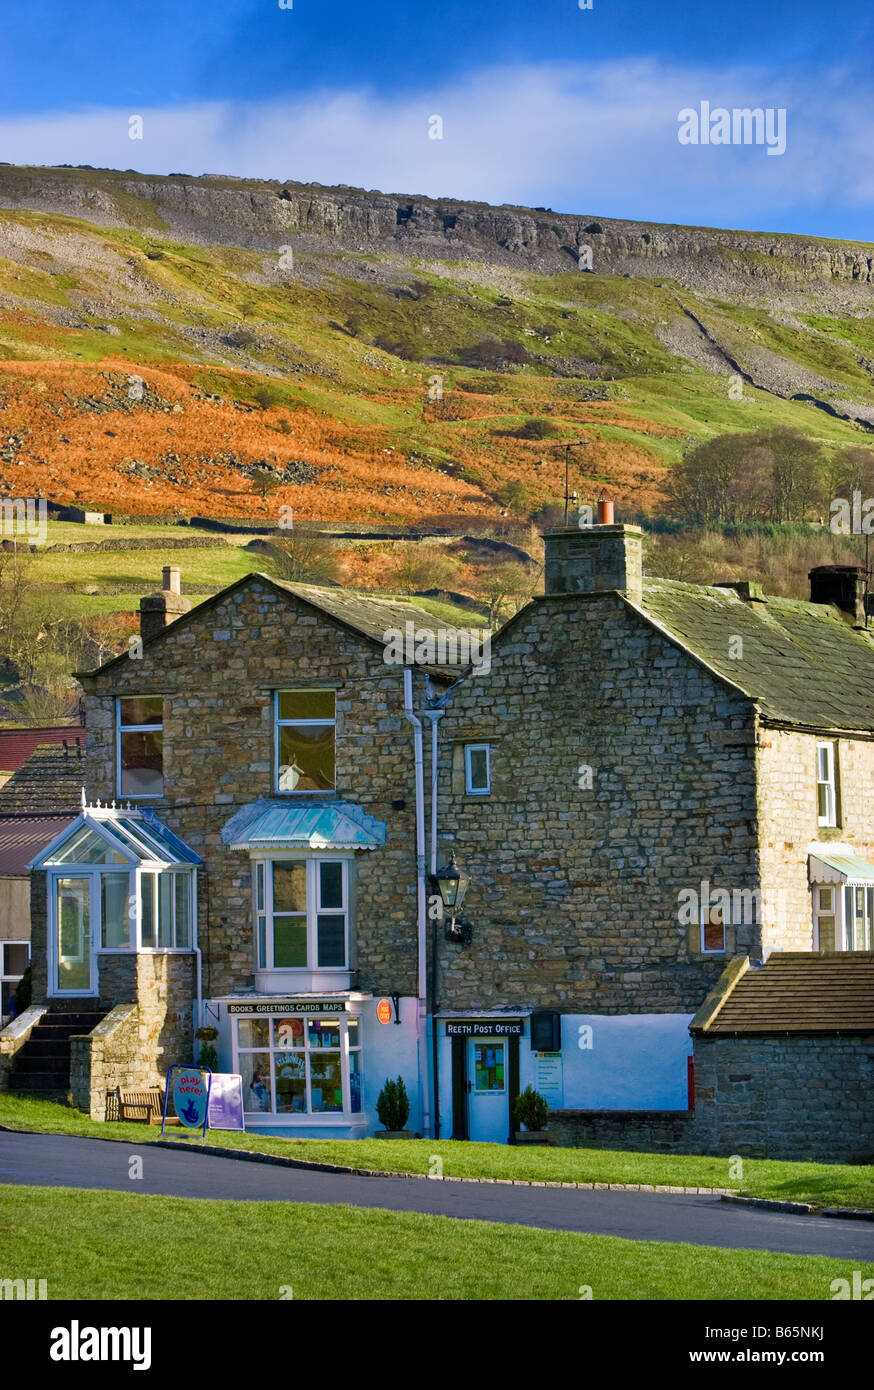 The tiny post office shop stores in the village of Reeth in Swaledale Yorkshire Dales England UK Stock Photo